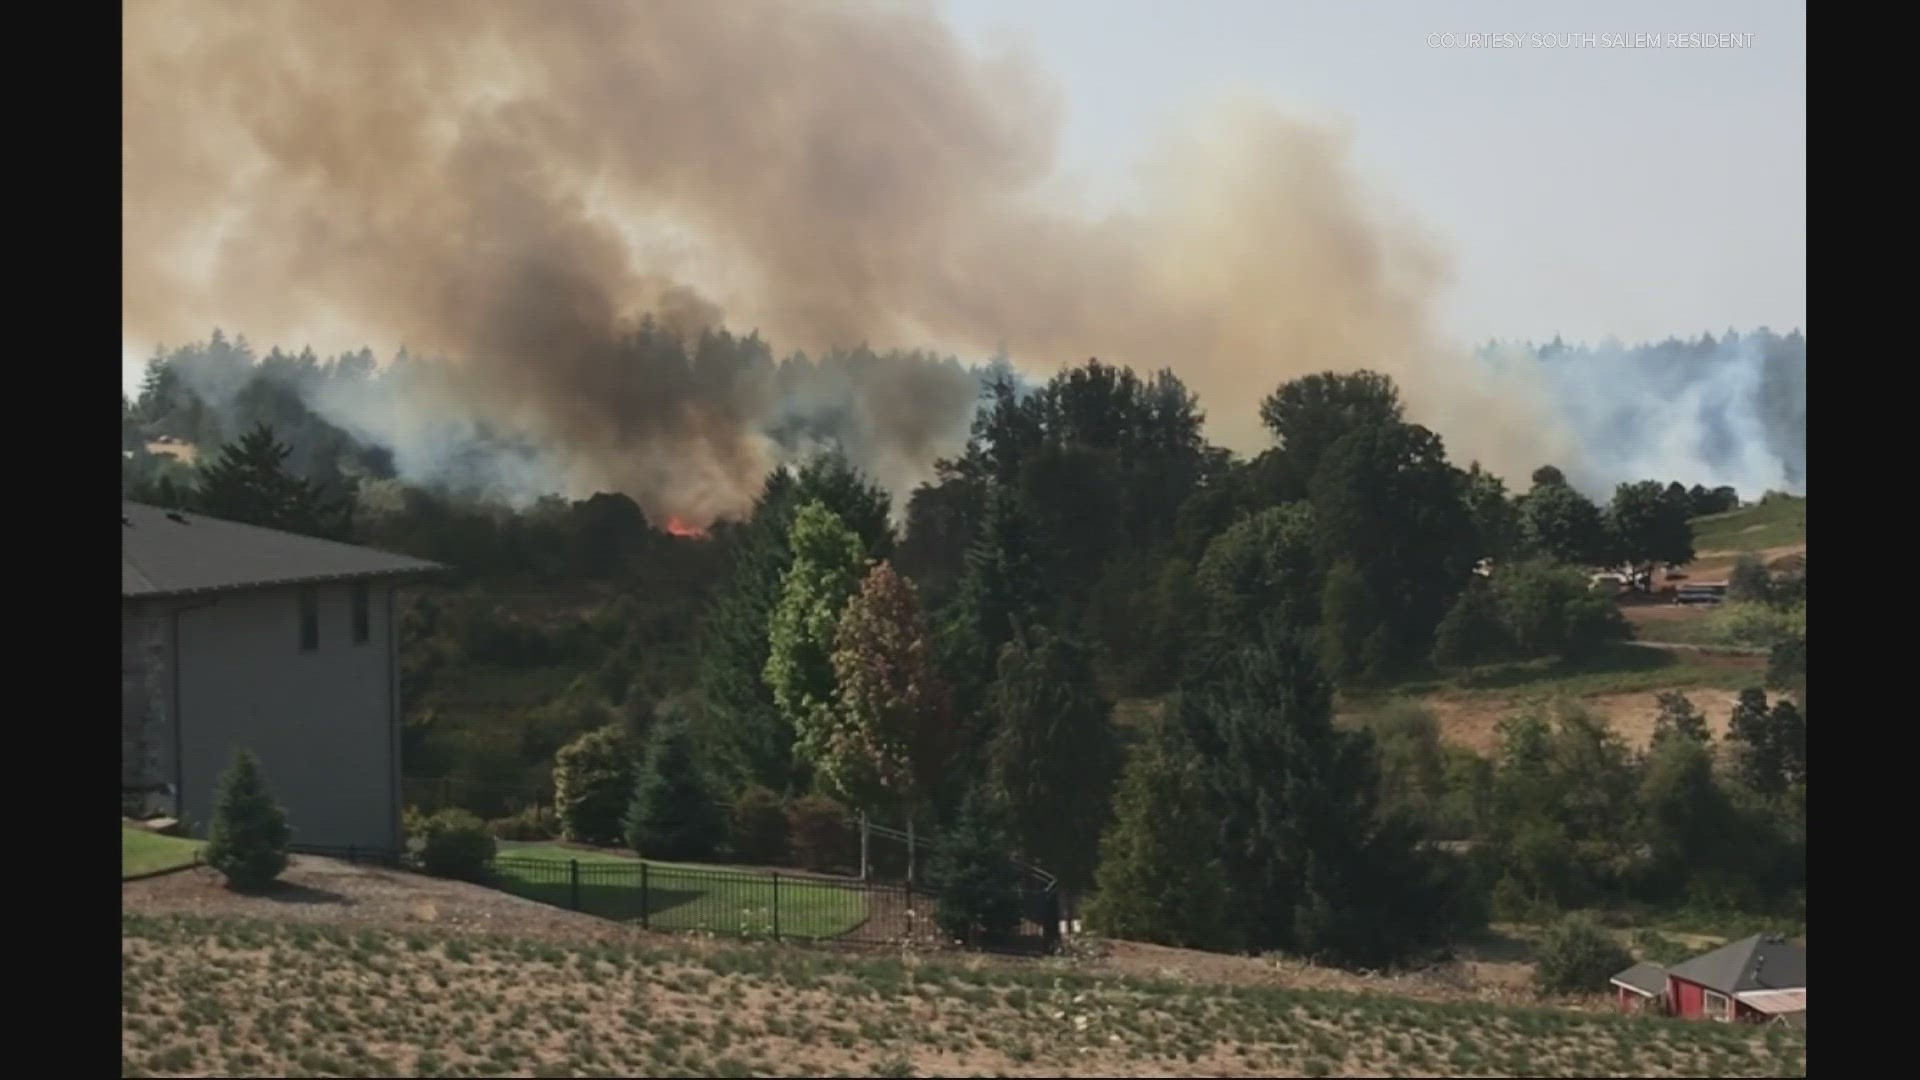 Fire officials estimated the Liberty Fire's size at roughly 100 acres as of 6:30 p.m. Level 3 and Level 2 evacuations remain in place for the area.